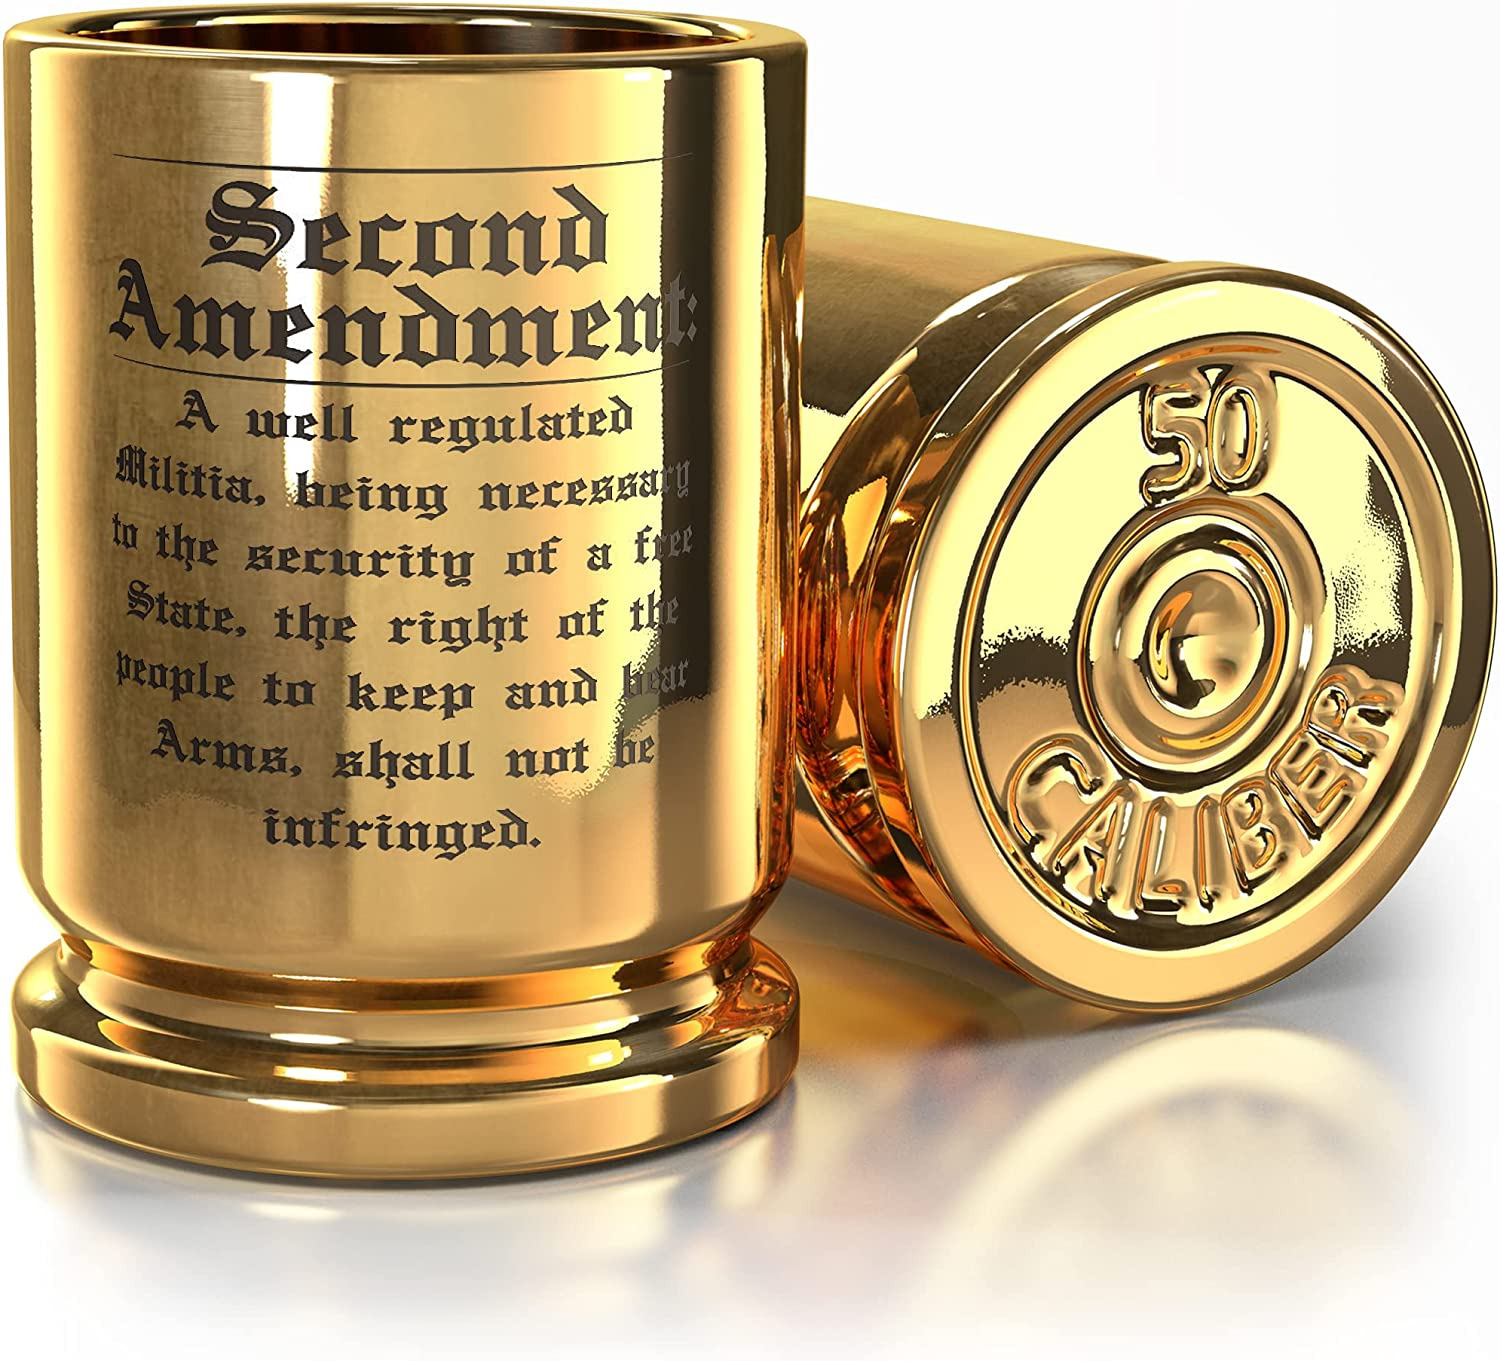 2 Set 2A 50 Cal Brass Ceramic Shot Glasses Engraved With 2A 